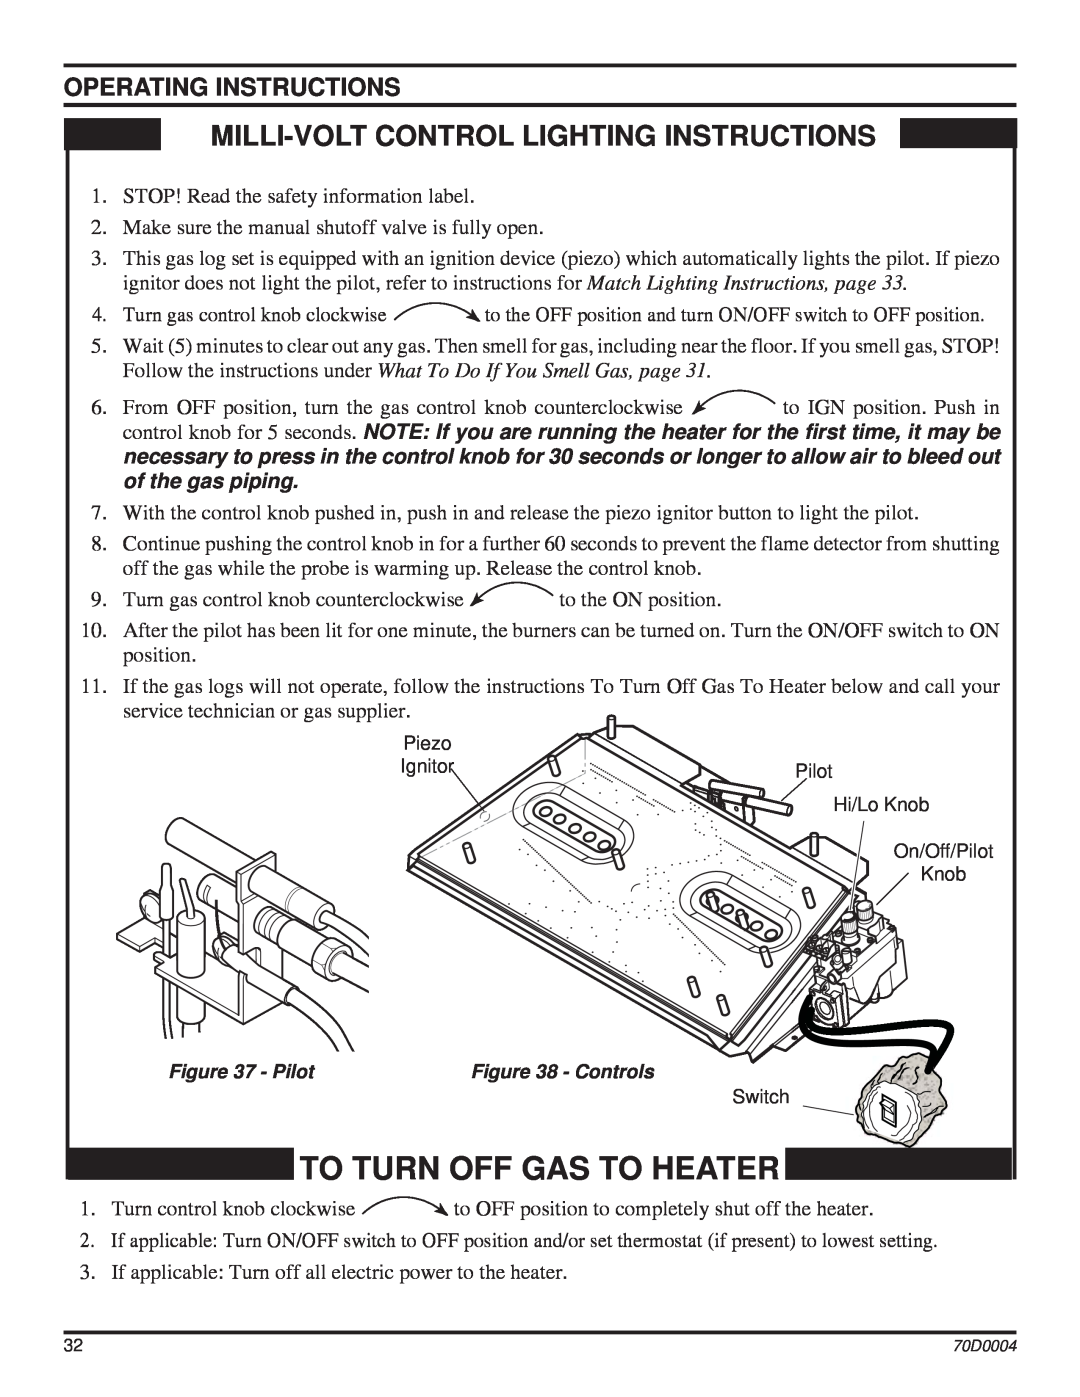 Monessen Hearth TPB18, TPB30 To Turn Off Gas To Heater, Milli-Voltcontrol Lighting Instructions, Operating Instructions 